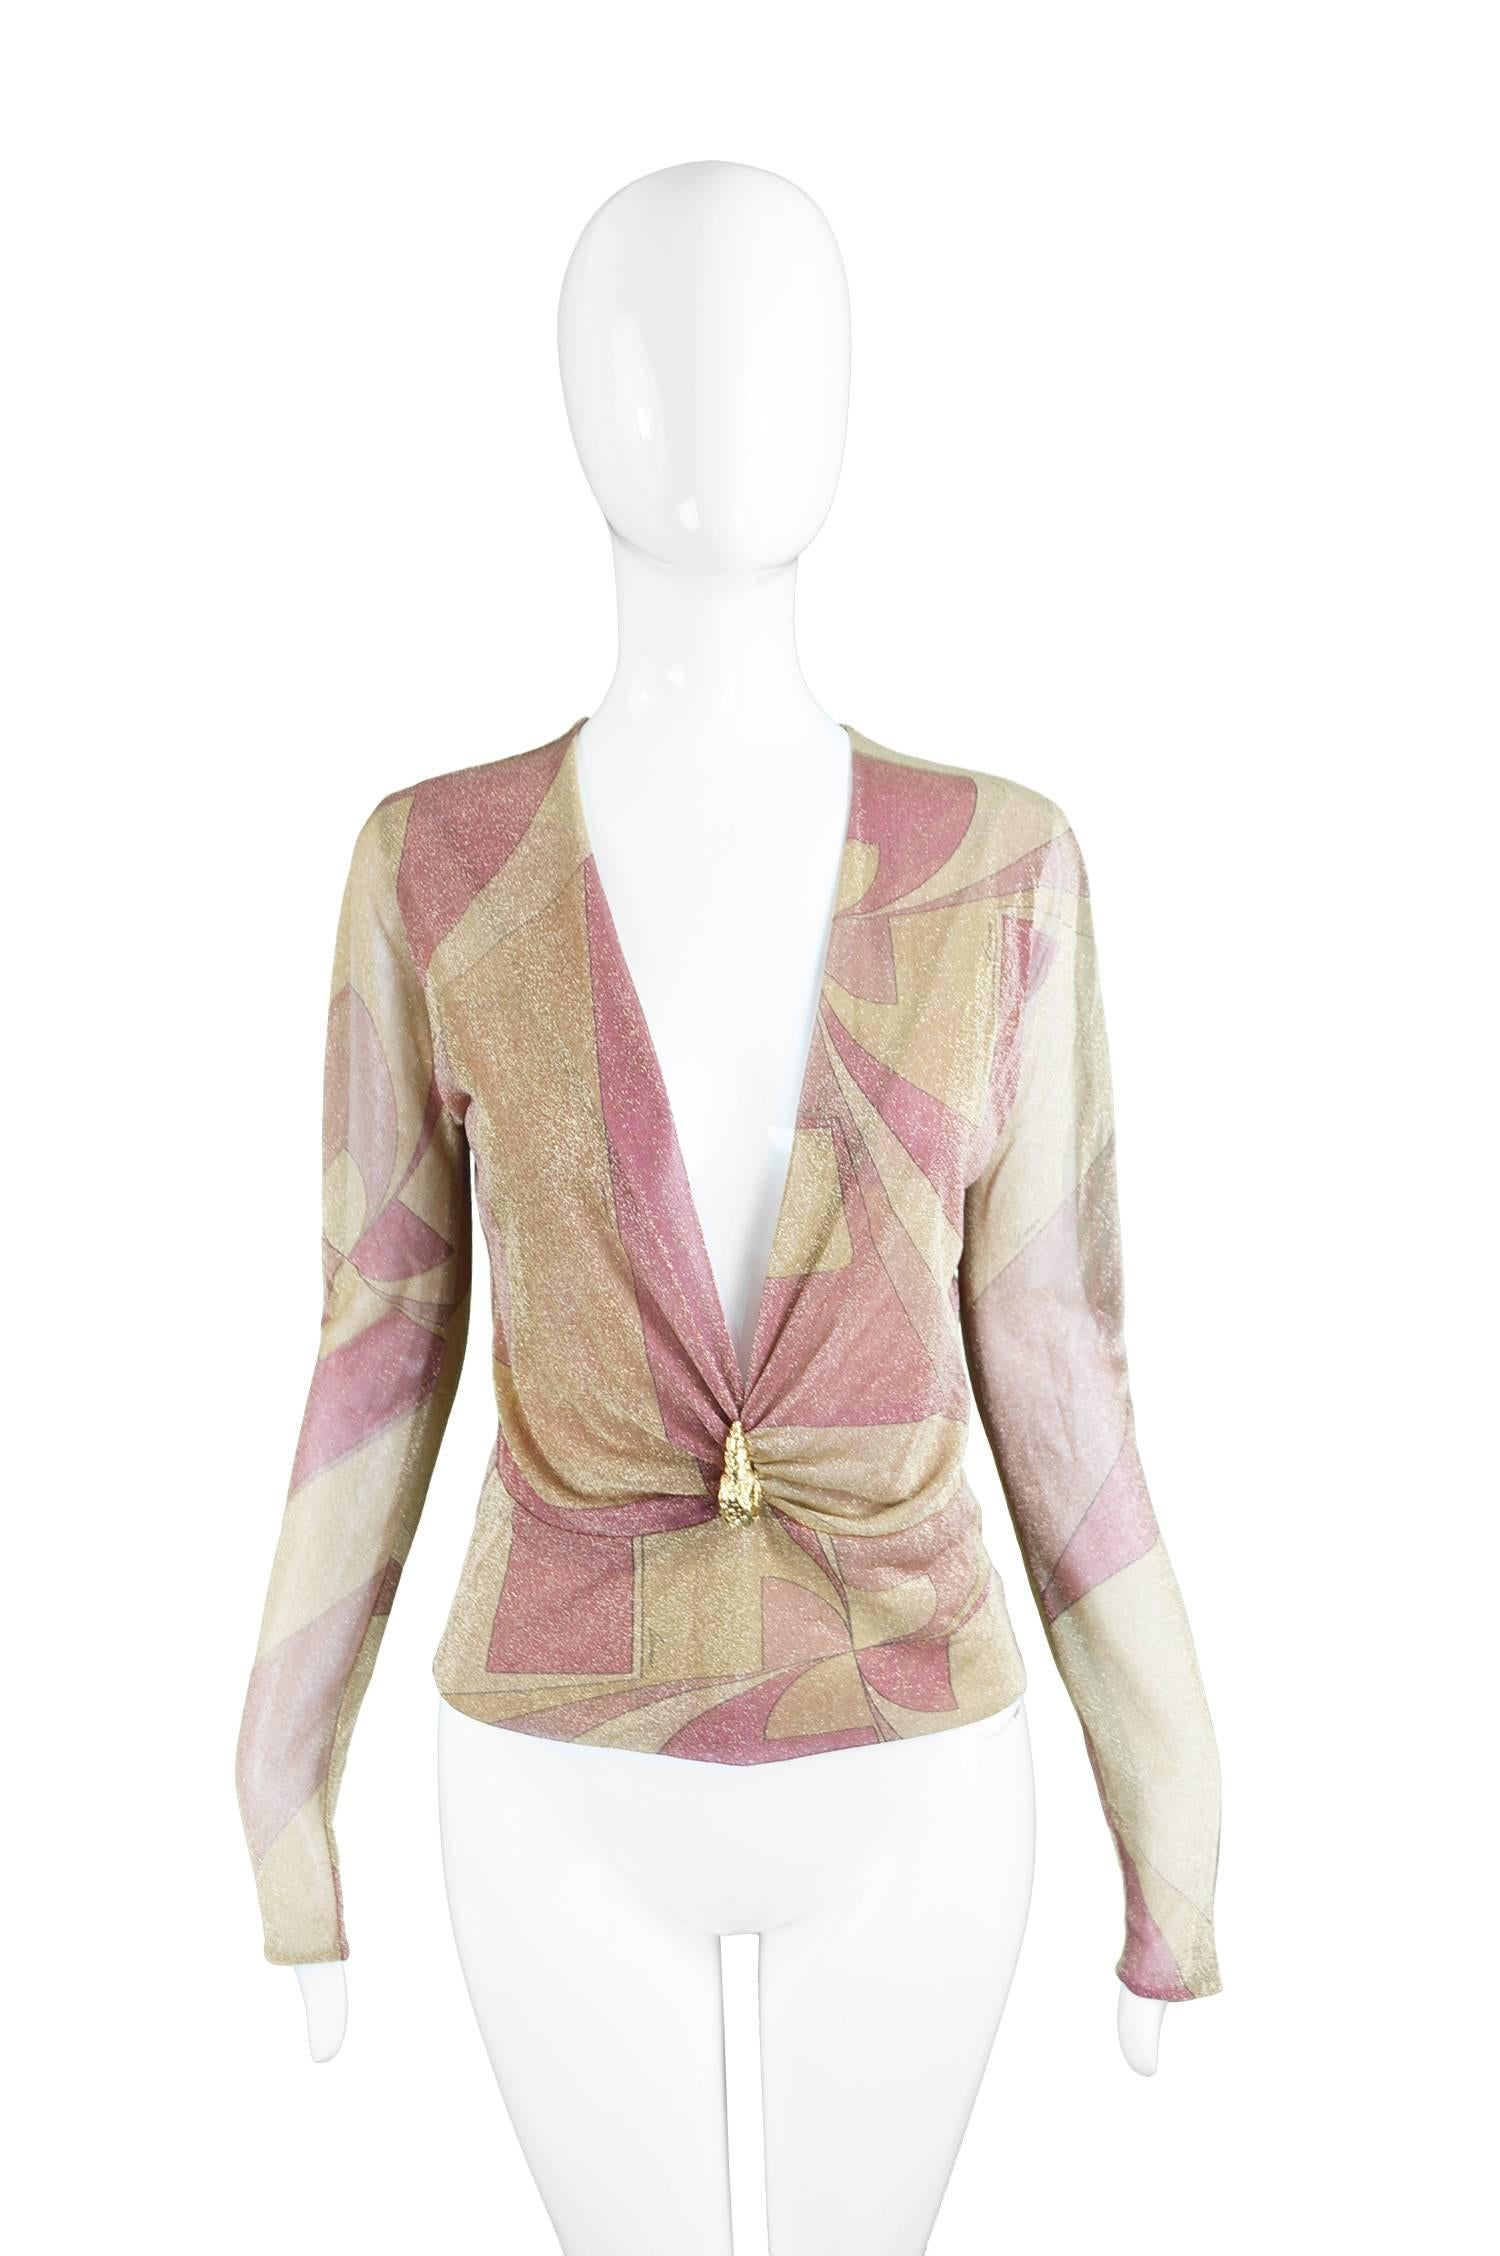 A stunning blouse by Gucci designed by Tom Ford for the Fall 2000 collection. In a lightweight silk, shot with a sparkly, metallic gold lurex that is dual layered on the body and single layered on the sleeves to give a sheer quality. 

The print is